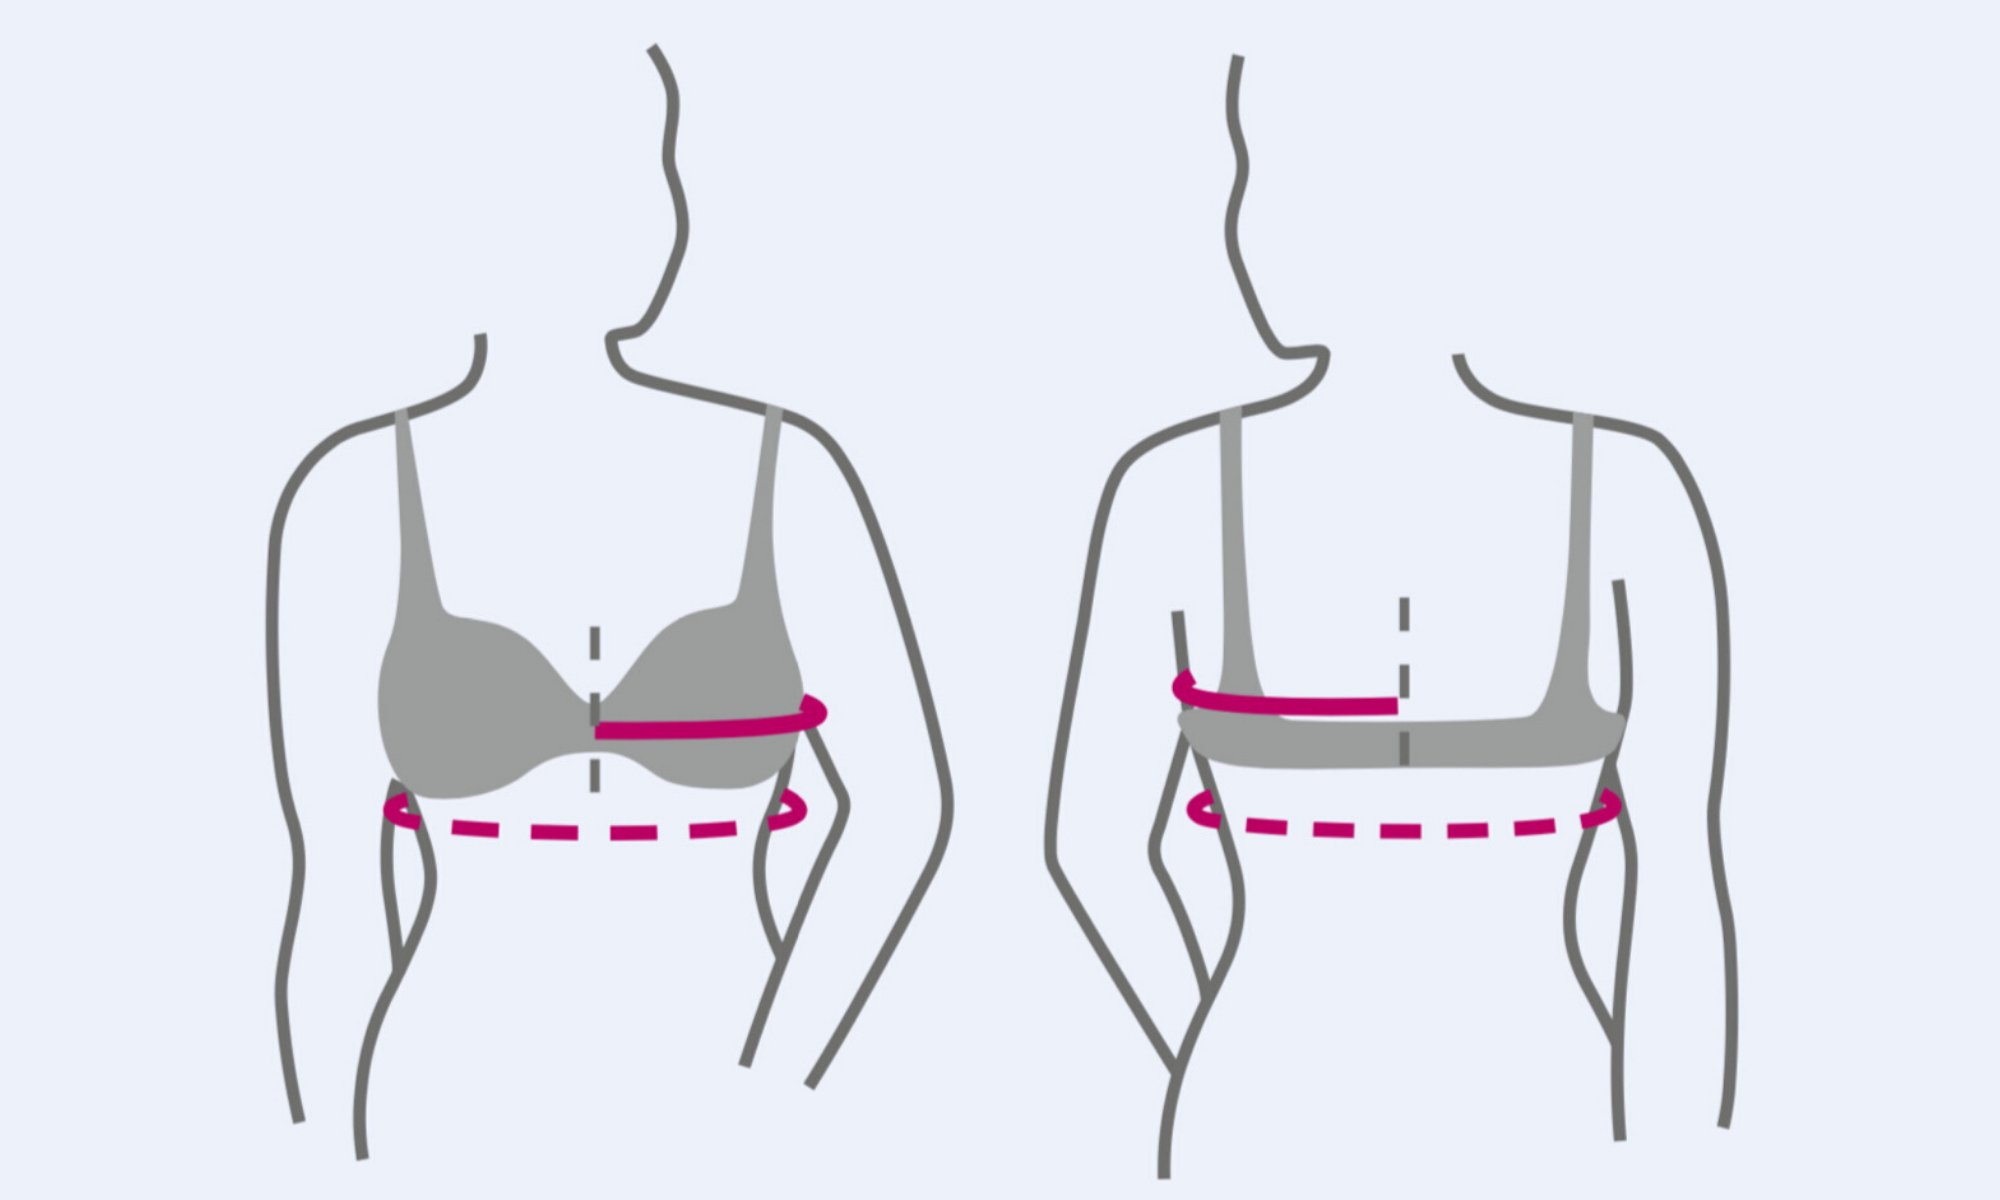 How To Determine Your Breast Shape To Find Your Perfect Bra!